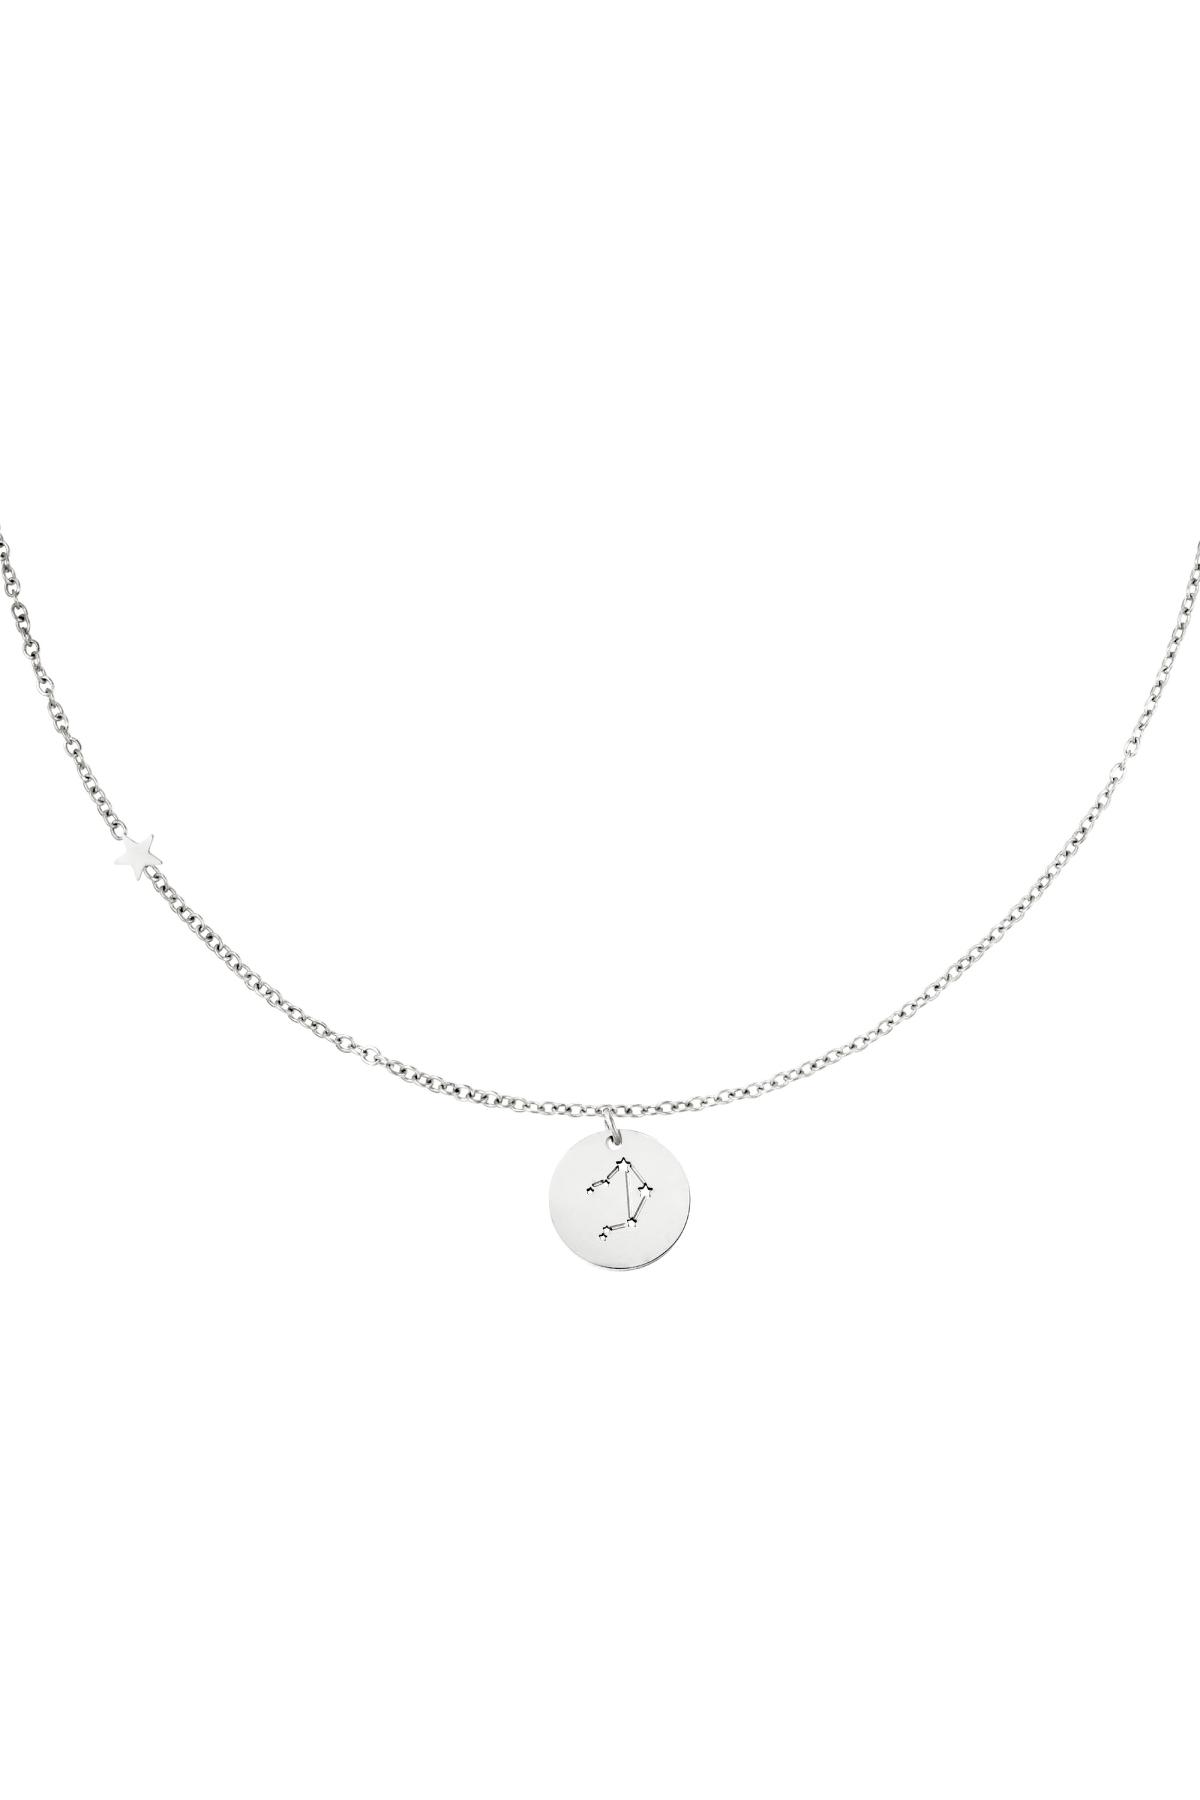 Necklace zodiac sign Libra Silver Stainless Steel